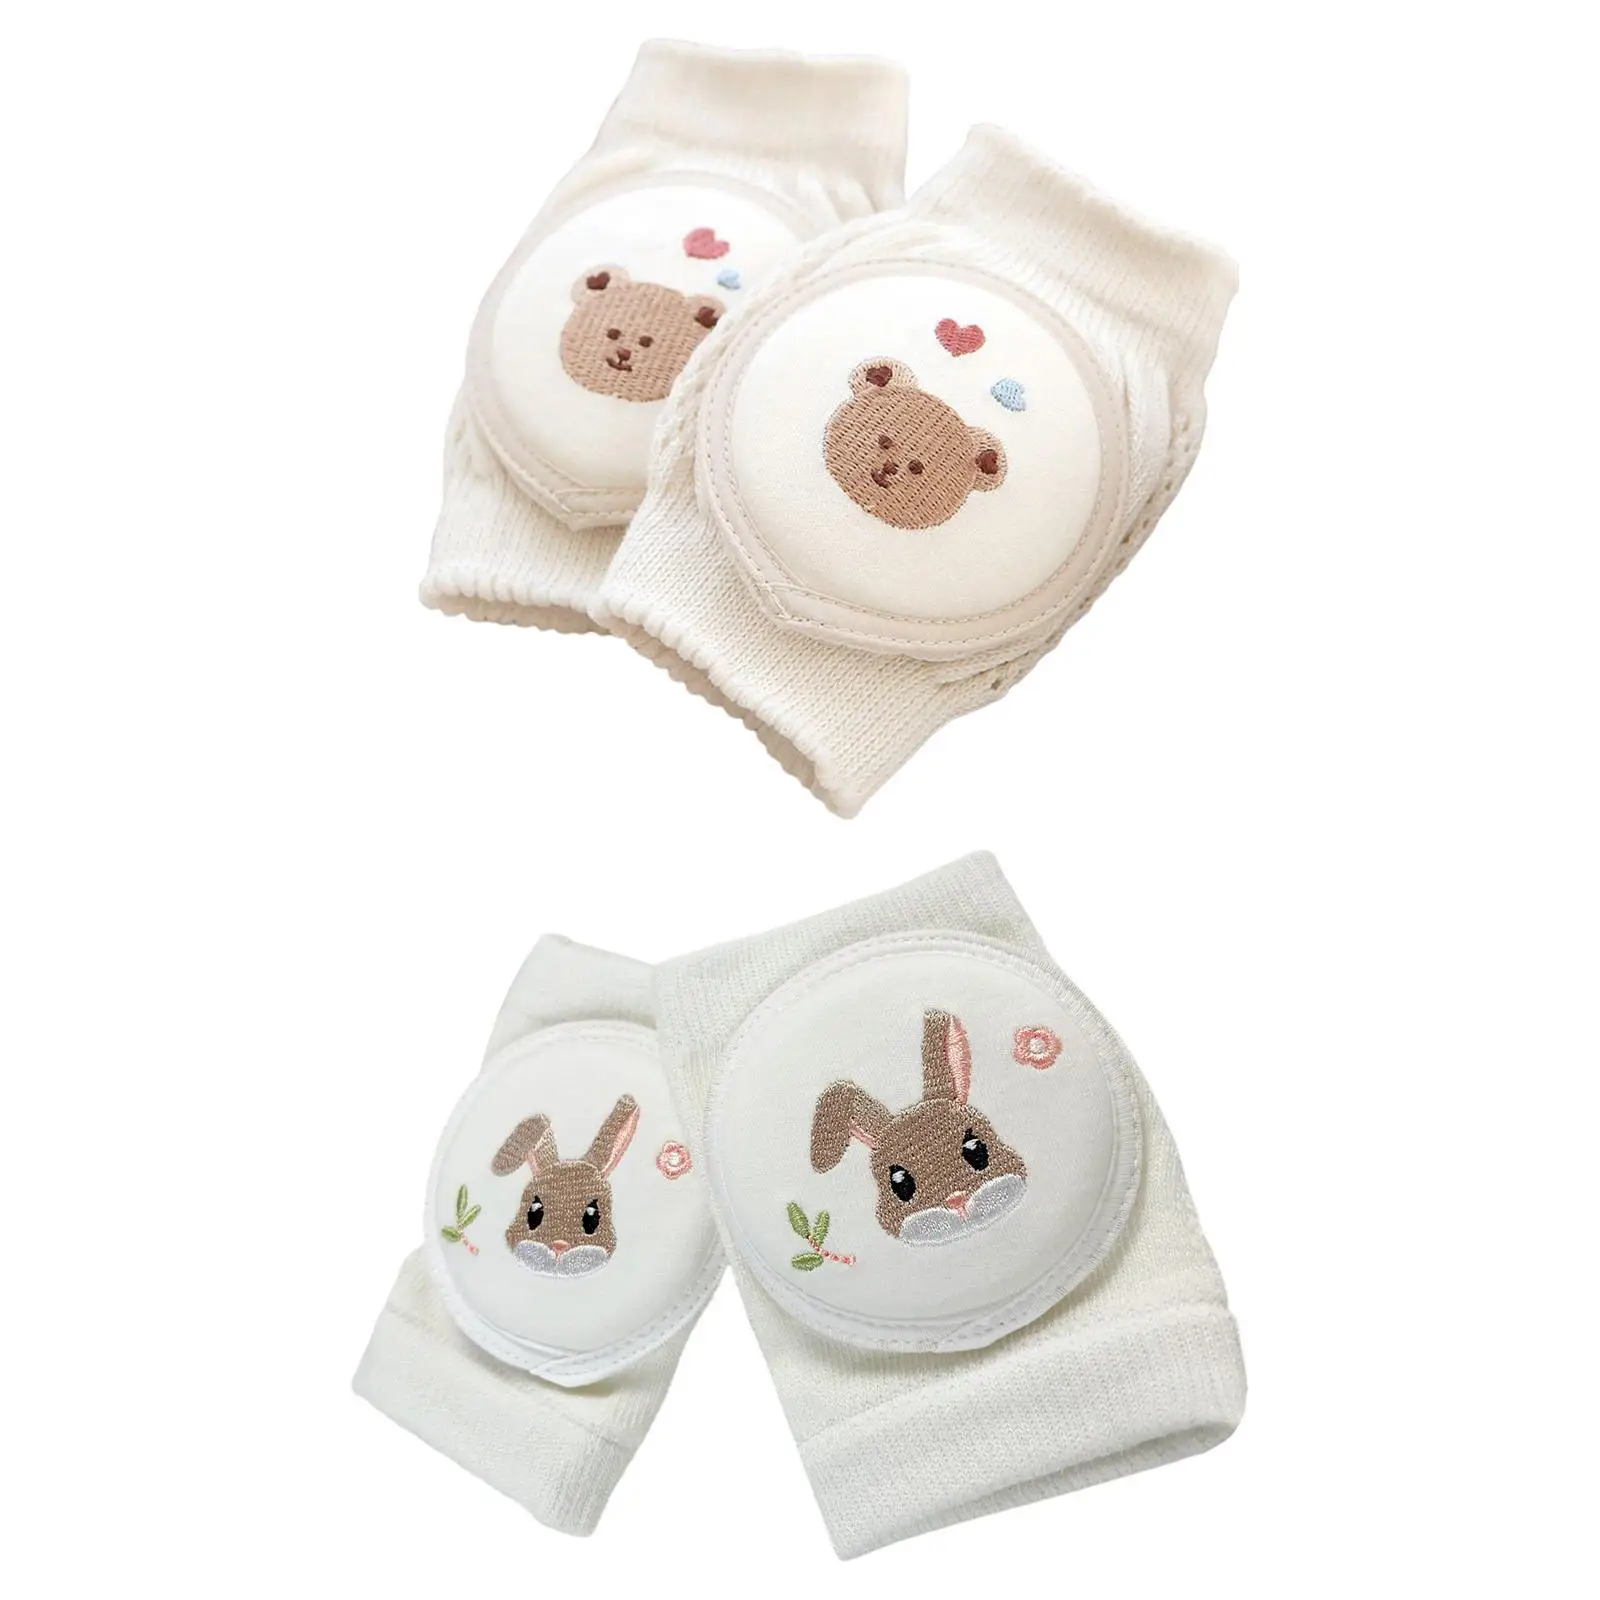 Baby Knee Pads Mesh Cartoon Thin Cotton Infant Cartoon Elbow Pads for Boys Infant Baby Walking Outside Summer